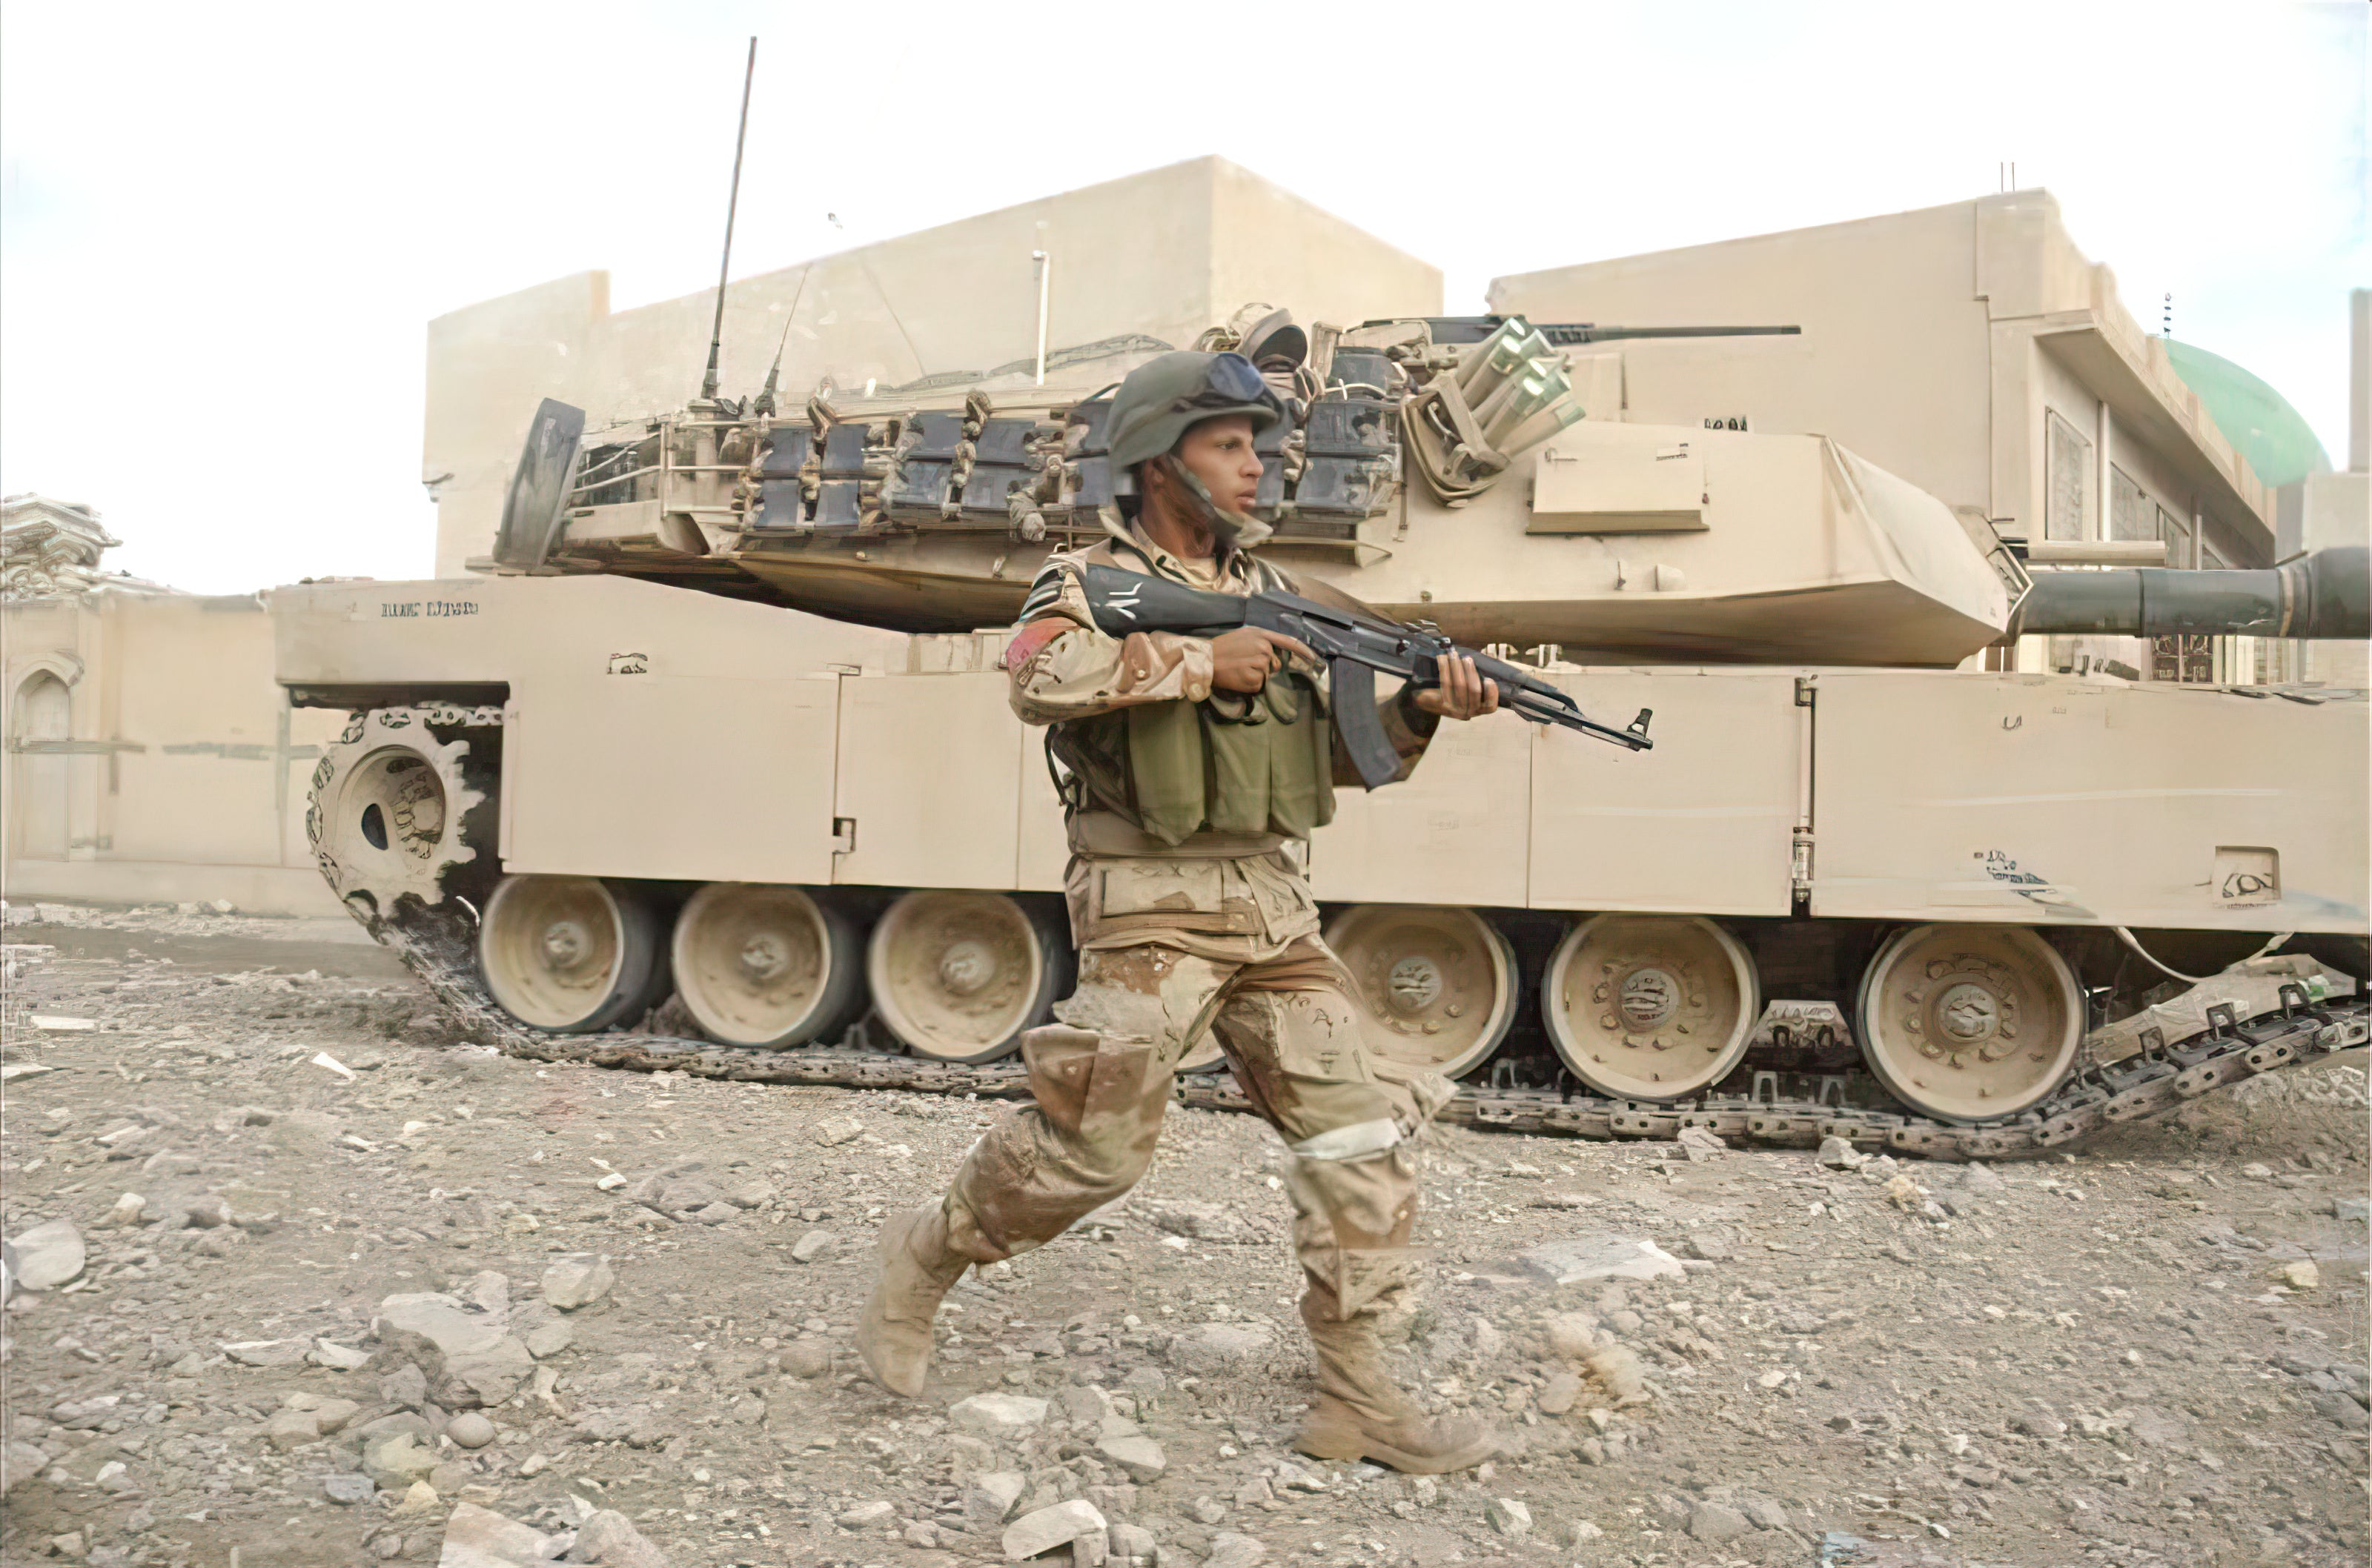 Battlefield Fallujah - Episode 6: Into the City, RCT-7 (November 7-9, 2004) - Image from battle